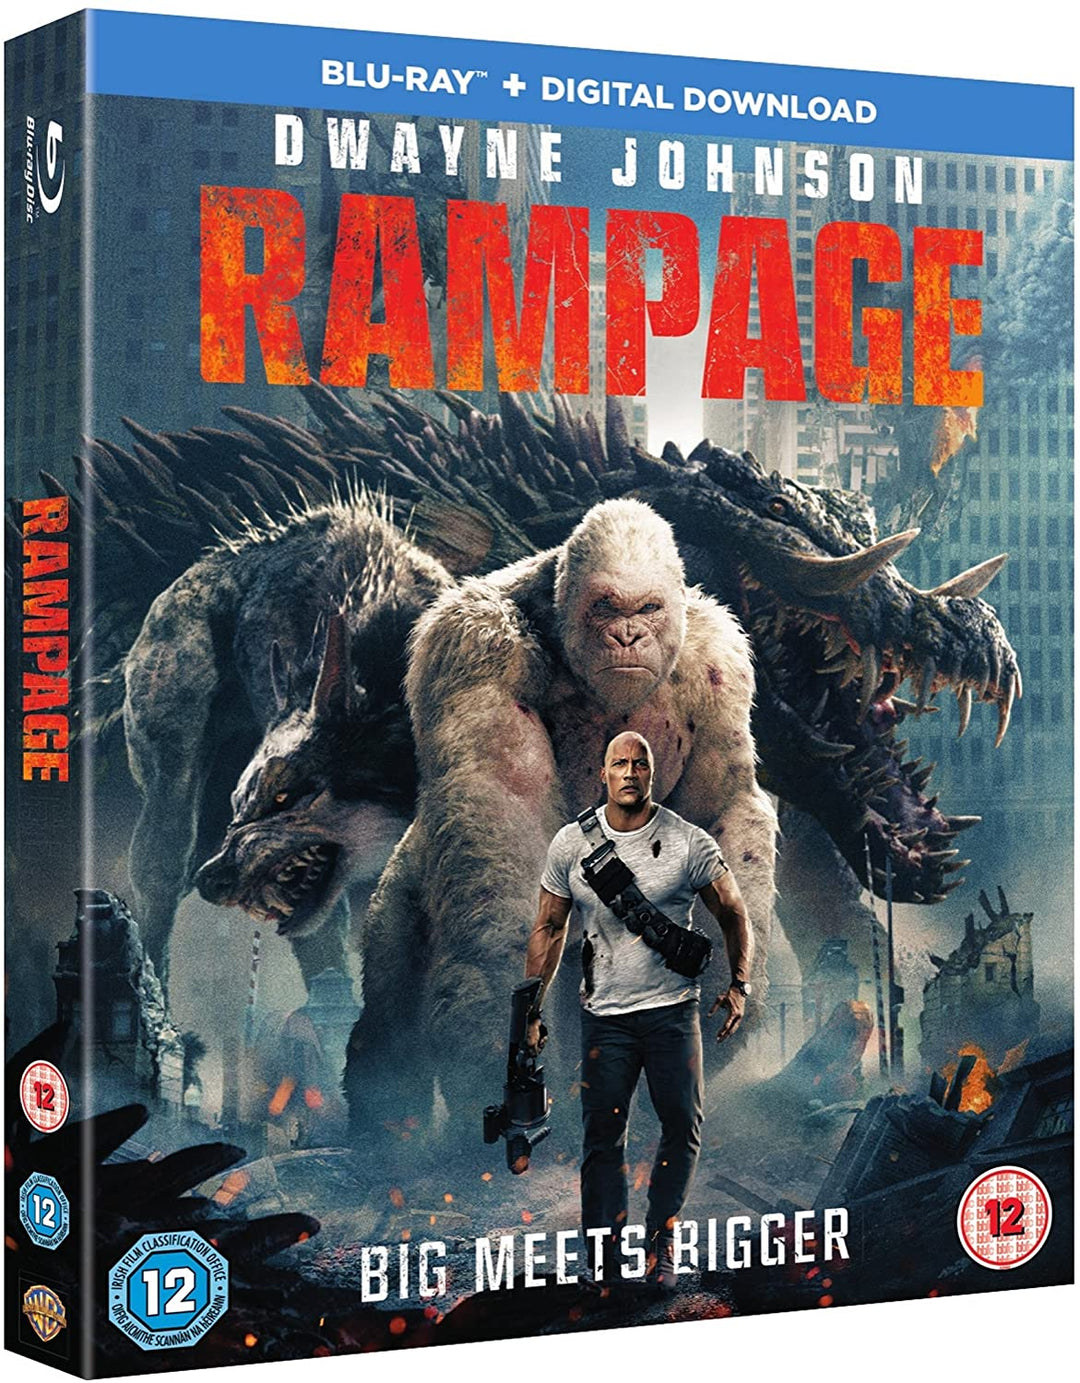 Rampage - Action/Adventure [DVD]